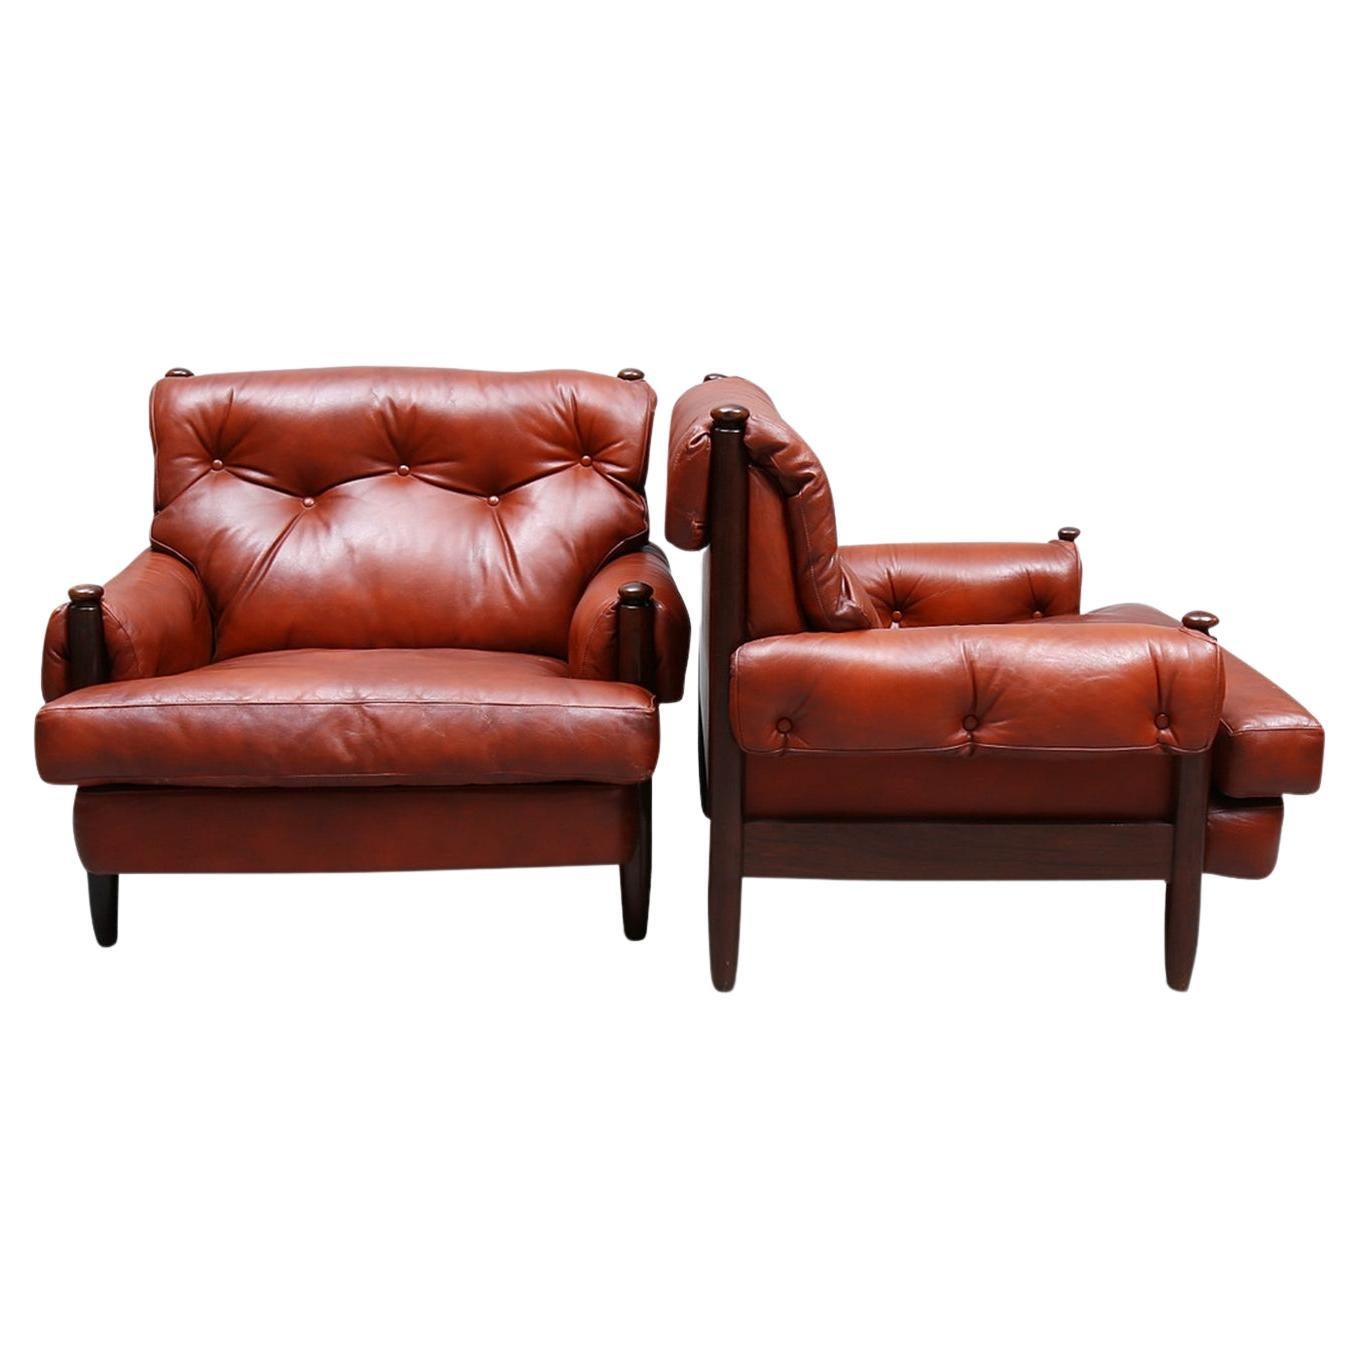 Pair of Rosewood + Rust Leather Lounge Chairs For Sale at 1stDibs